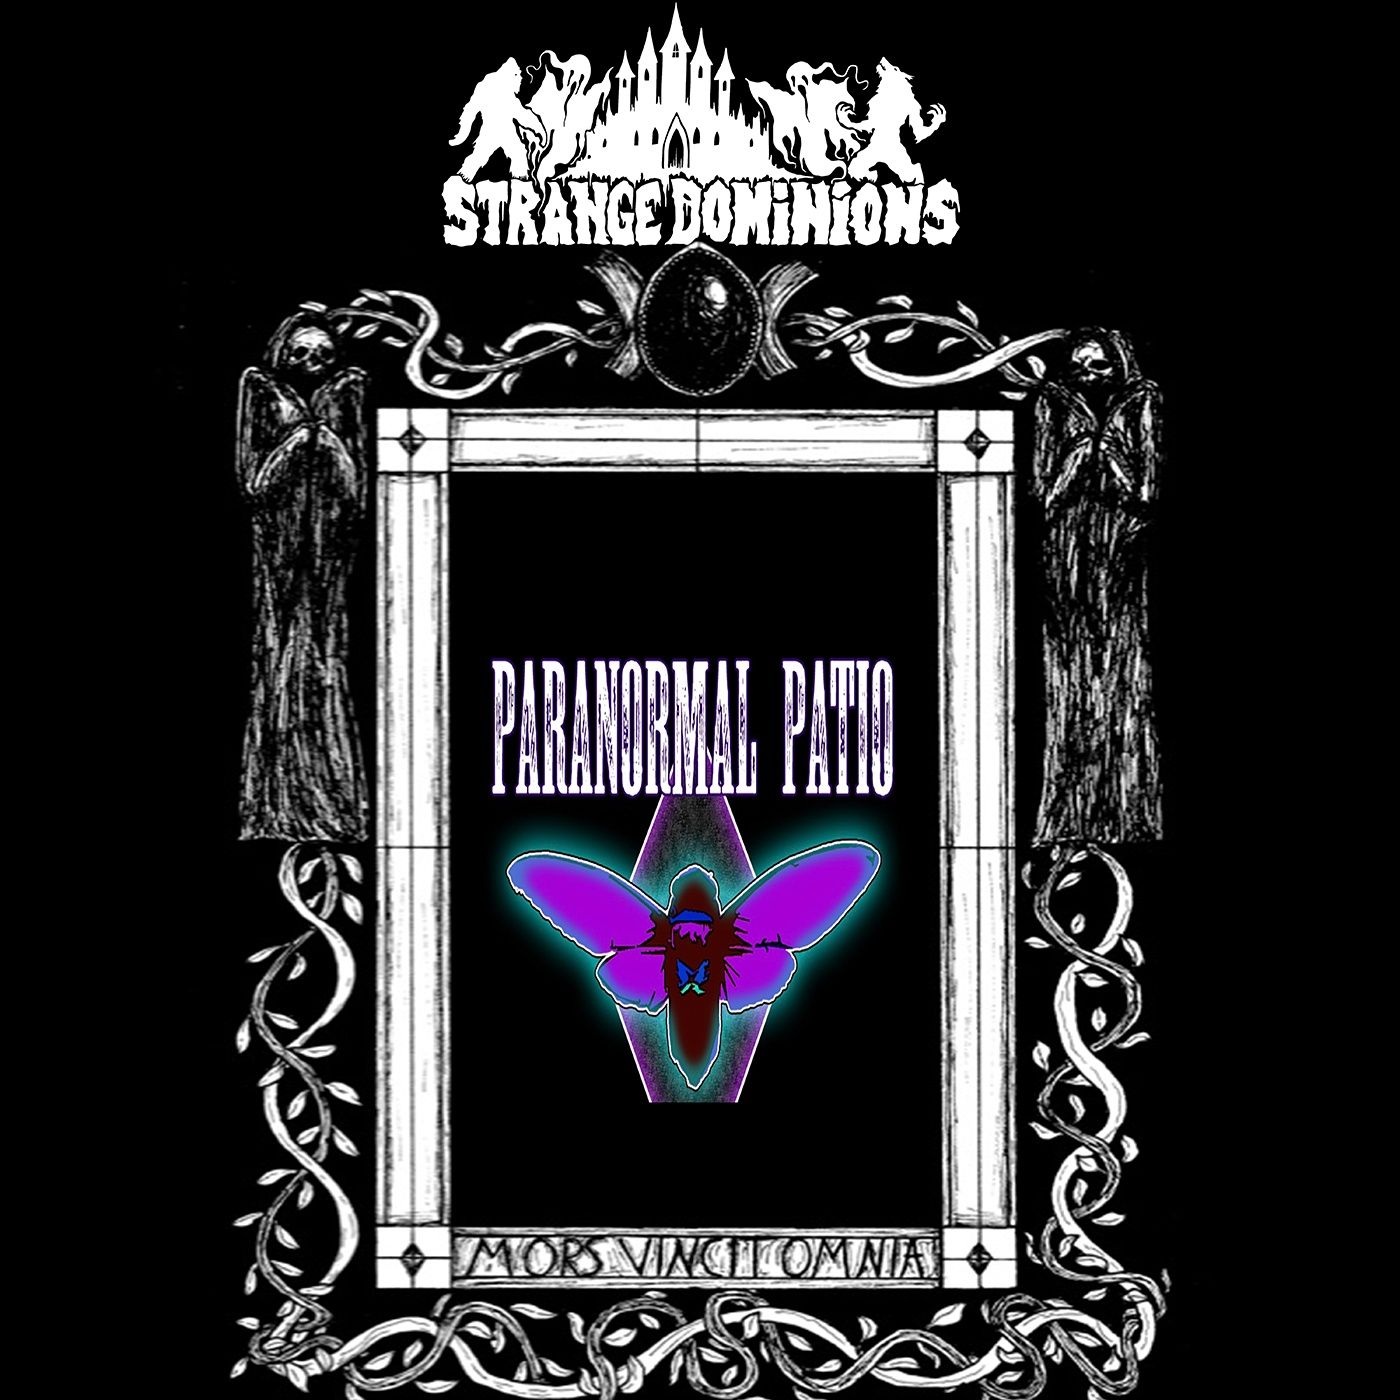 Strange Dominions Episode 17: Exploring the anomalous with Jason Andrews From Paranormal Patio Podcast